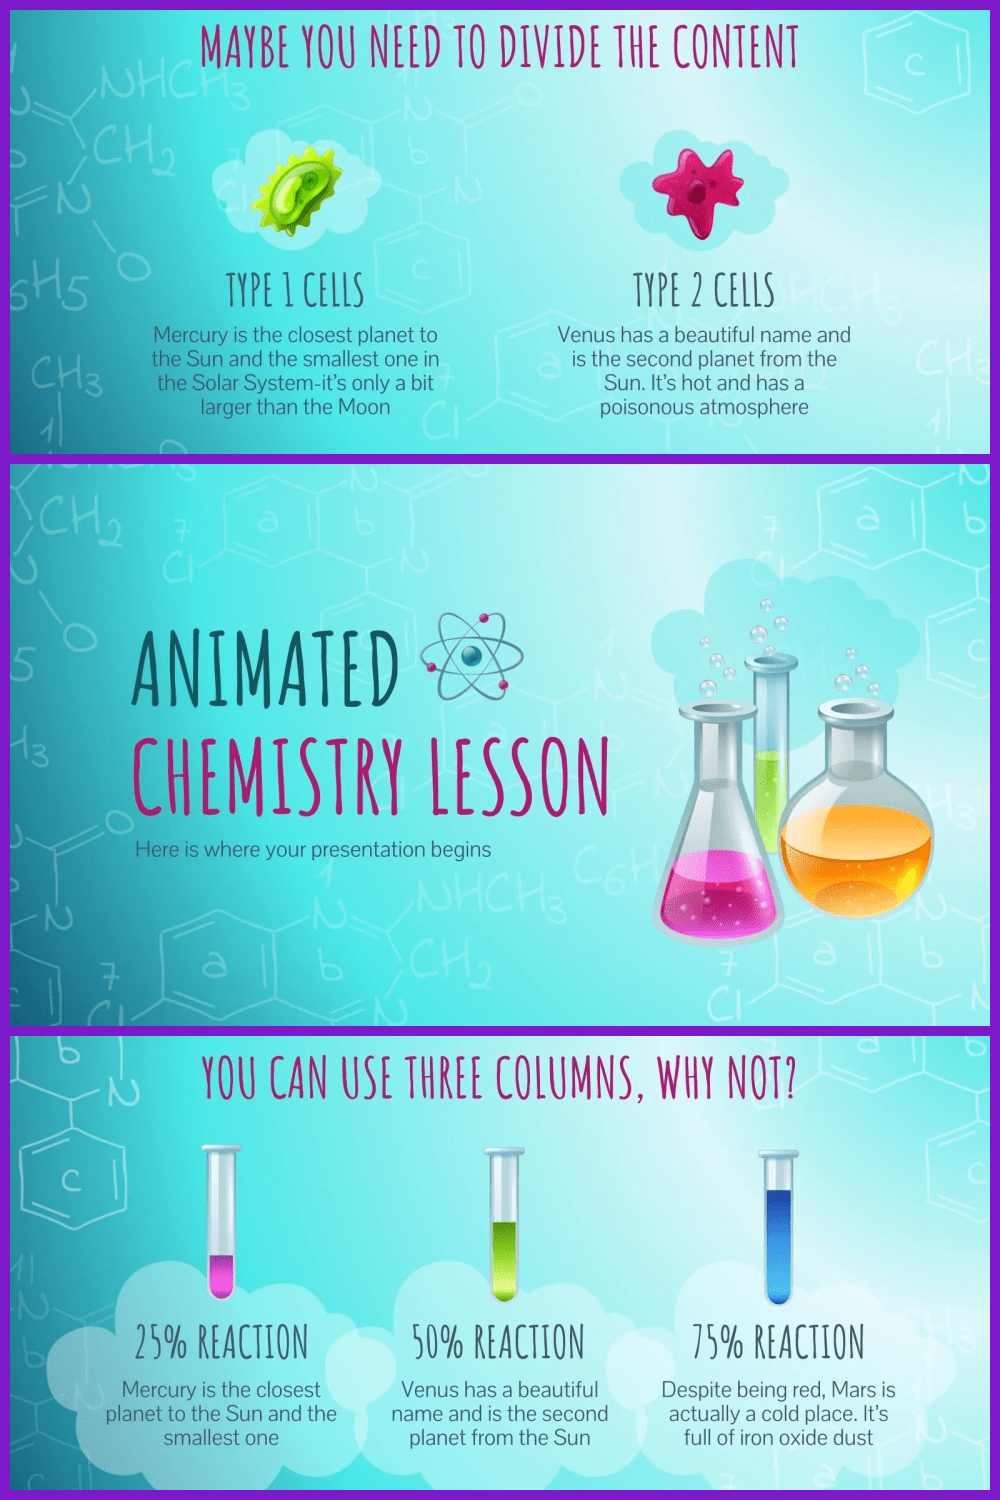 Animated Chemistry Lesson.